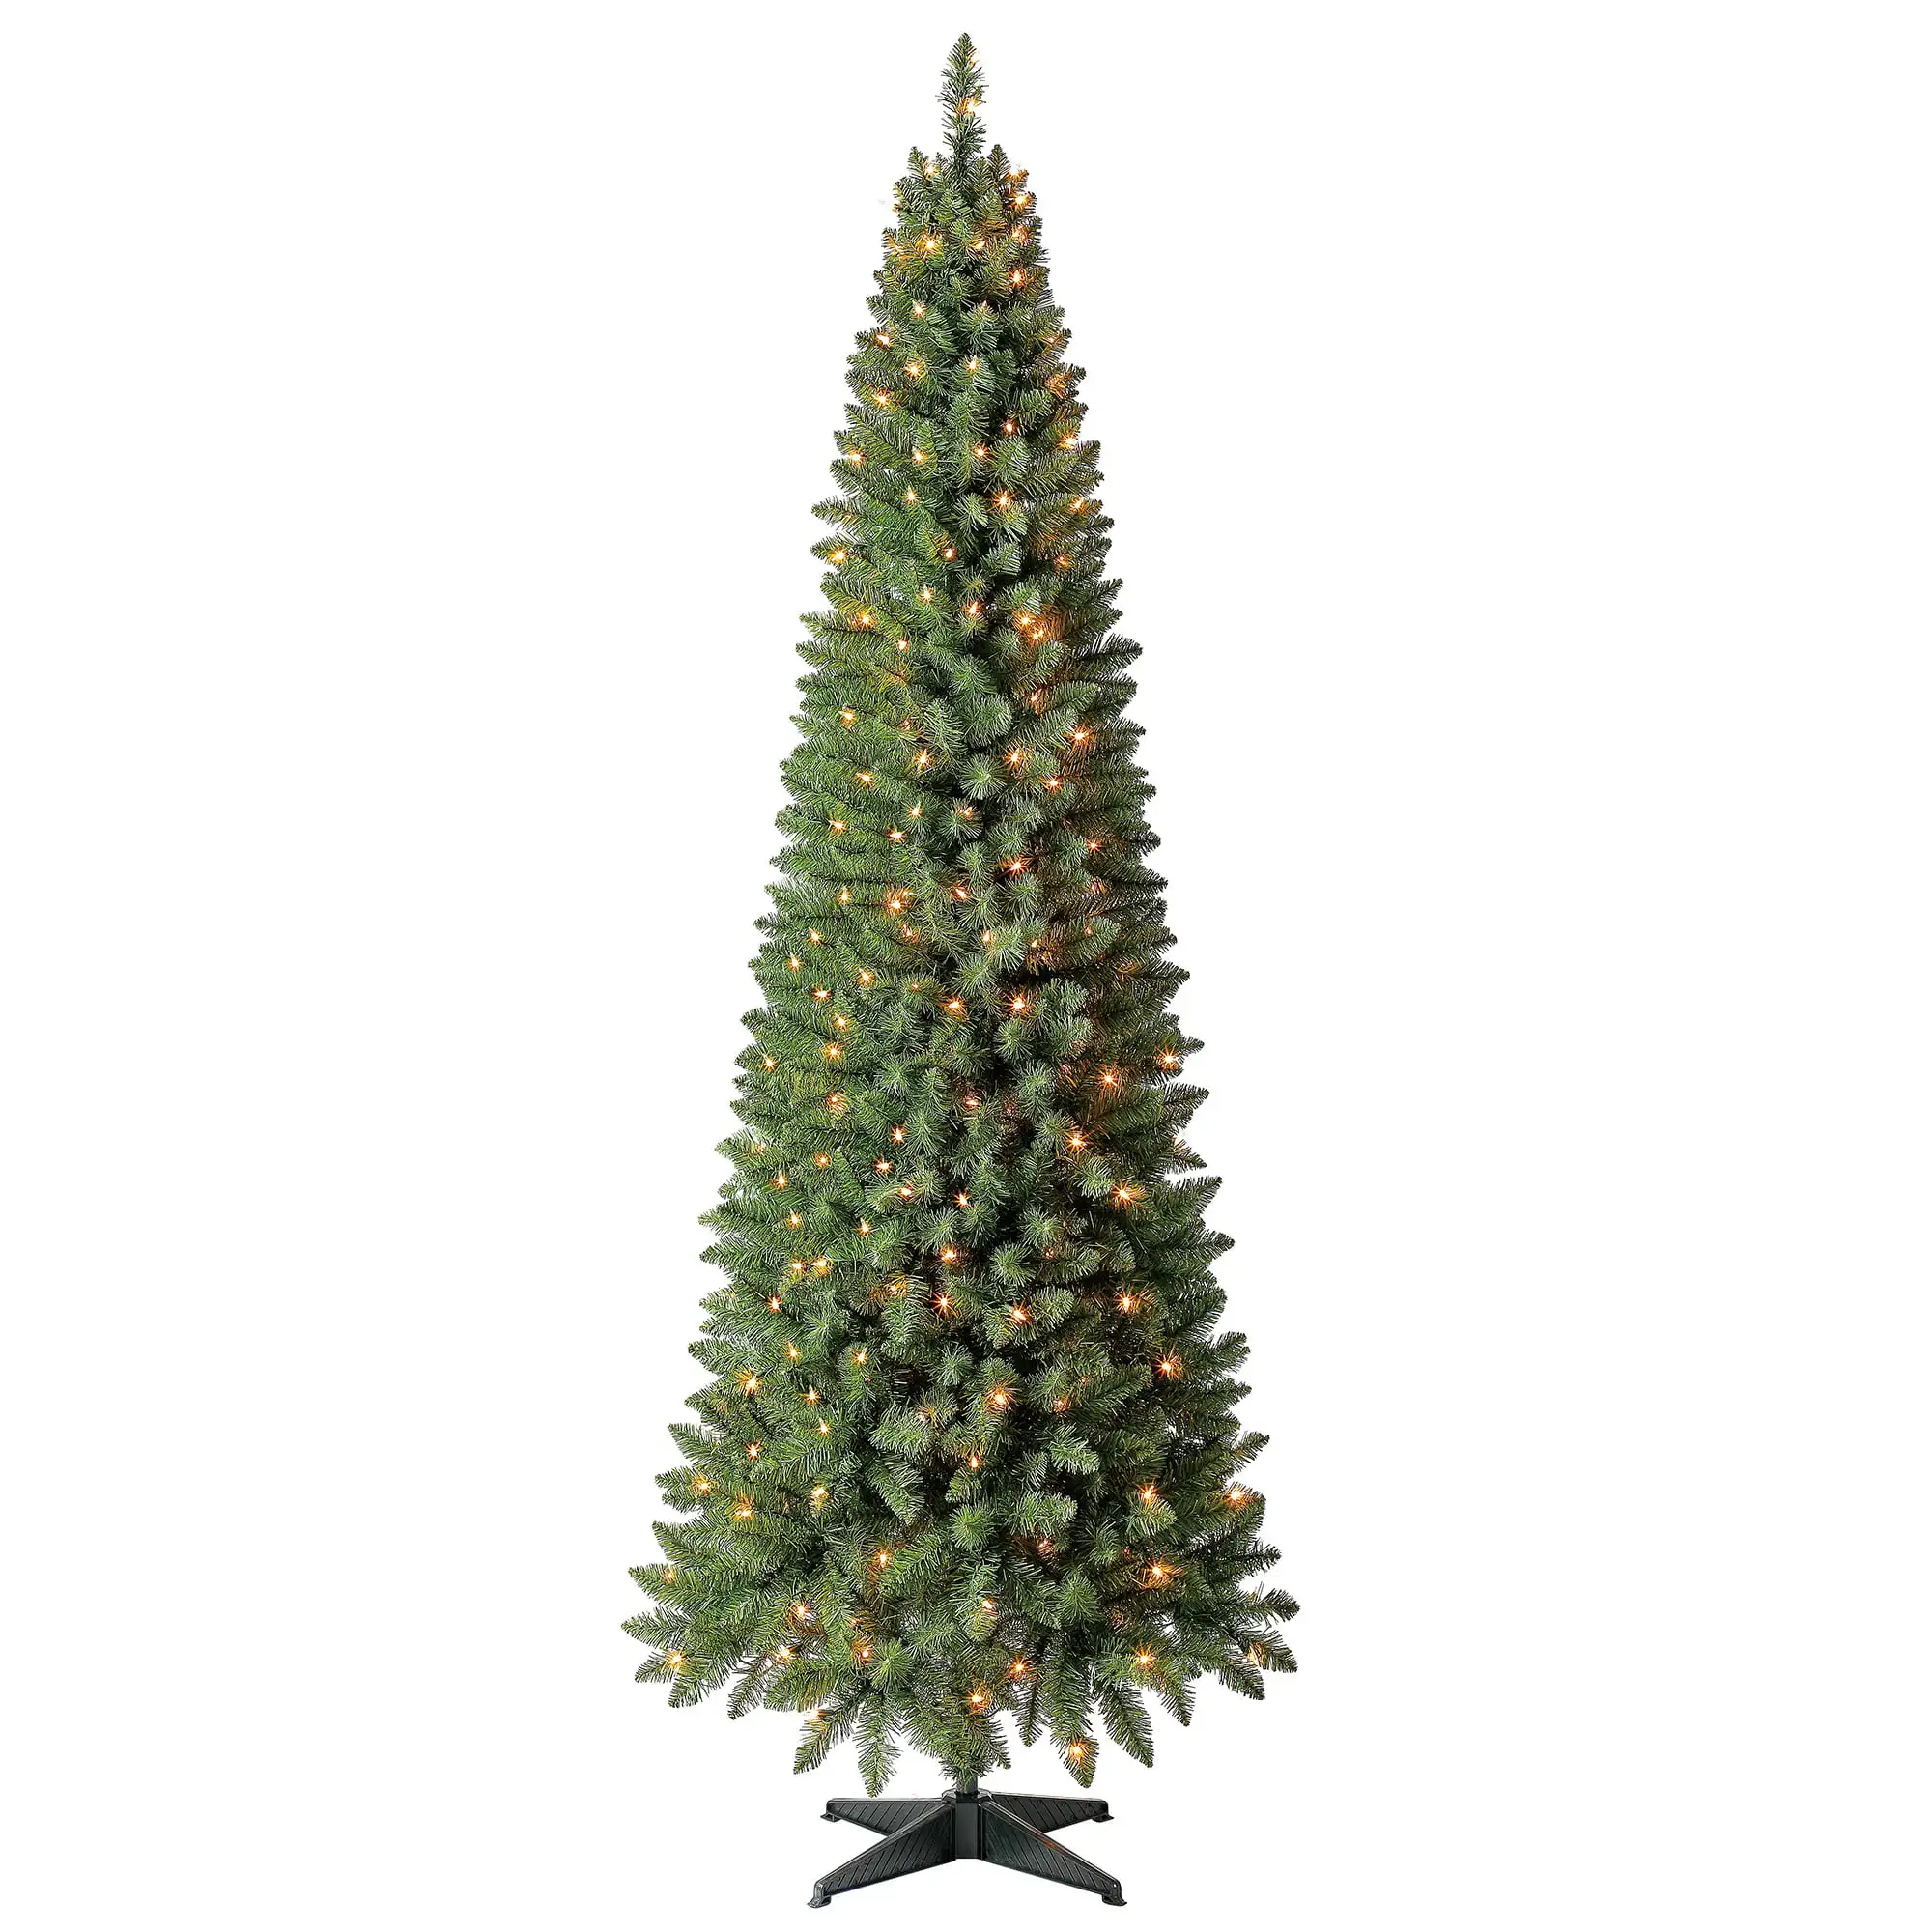 Holiday Time Prelit 250 Clear Incandescent Lights, Brinkley Pencil Pine Artificial Christmas Tree, 7'